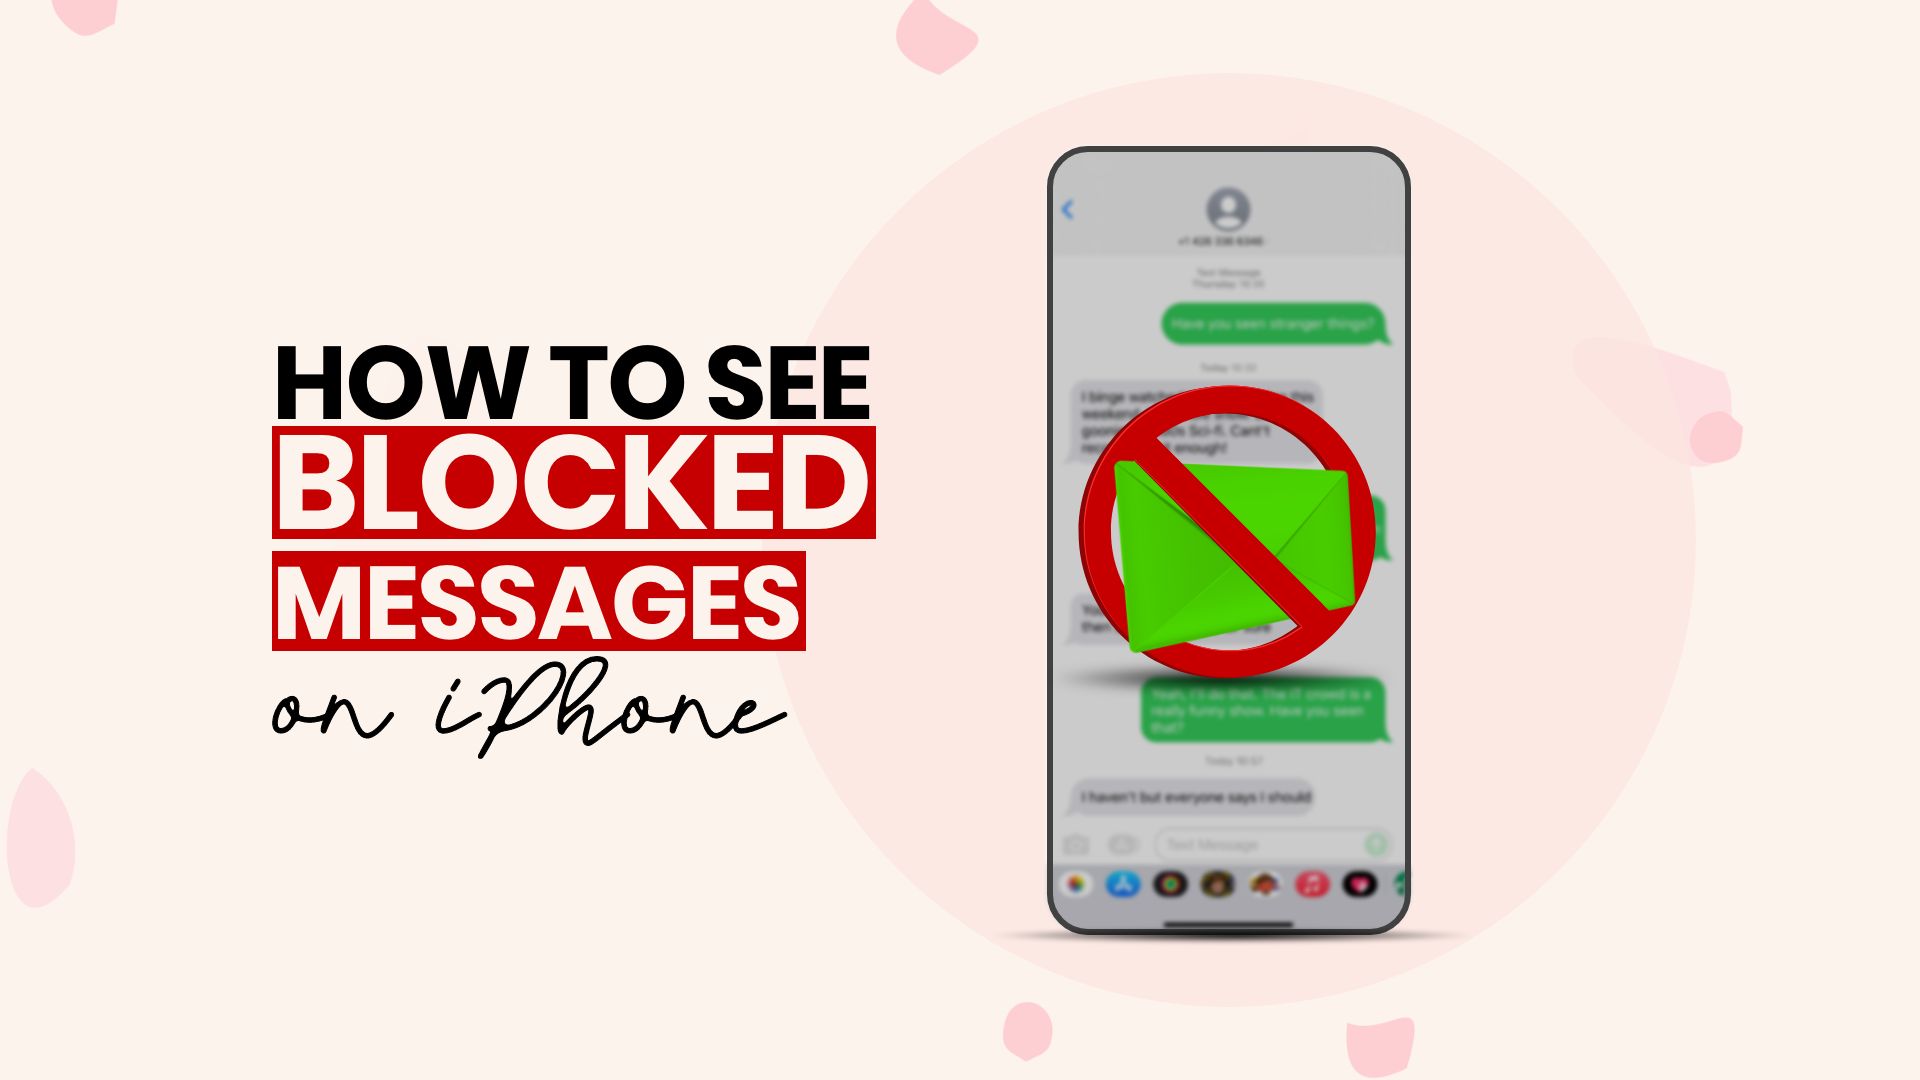 how to see blocked messages on iPhone